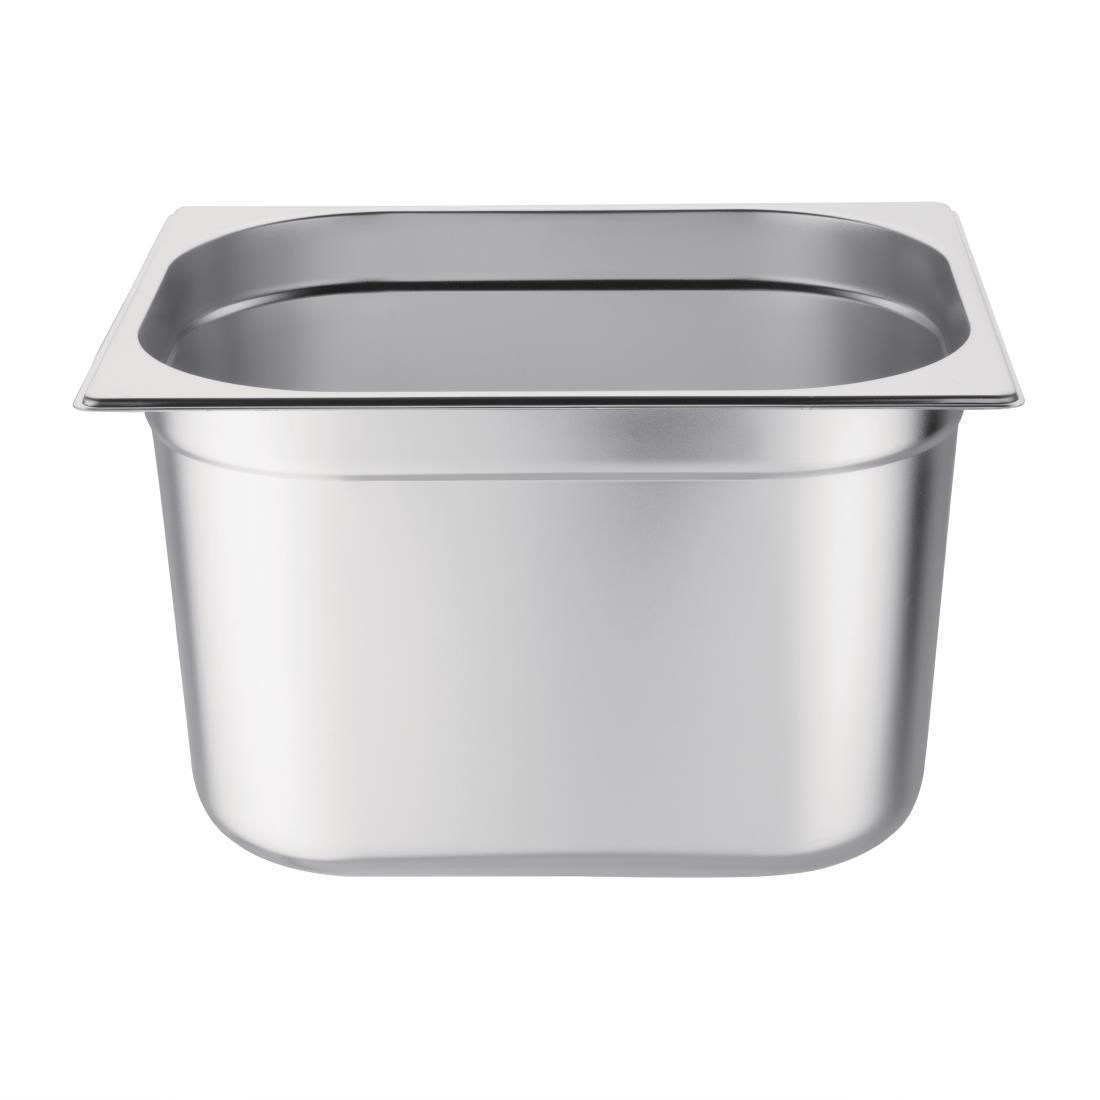 Vogue Stainless Steel 1/2 Gastronorm Pan 200mm - K932  - 2